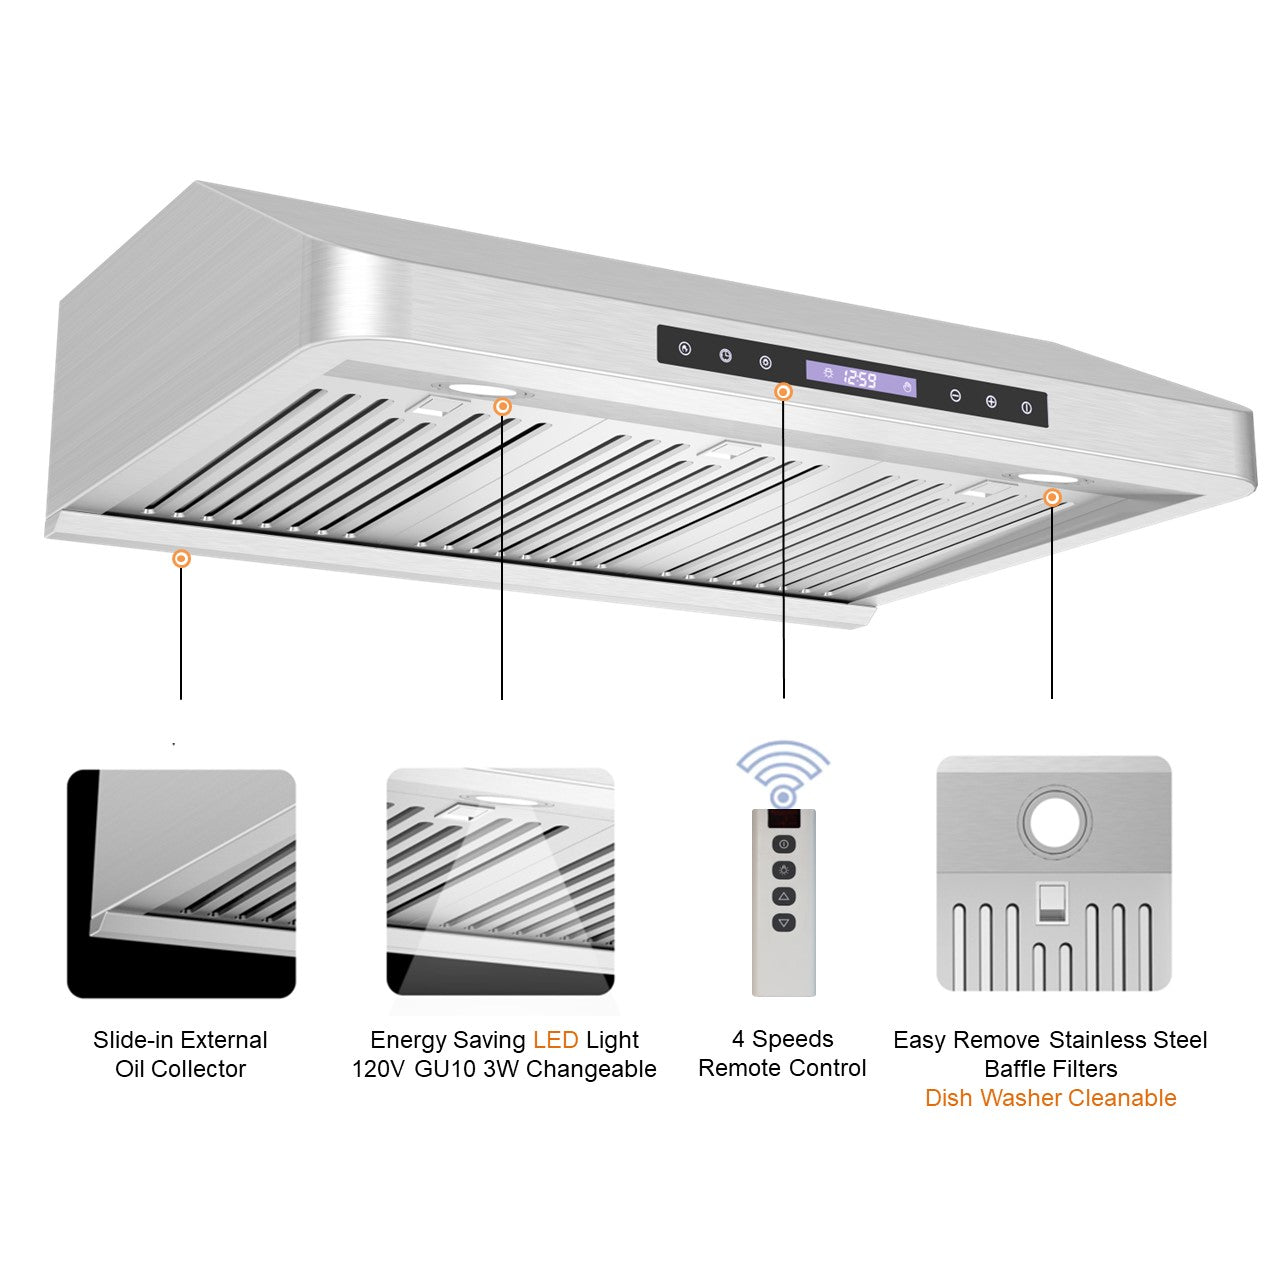 Awoco 30” Under Cabinet Supreme 7” High Stainless Steel Range Hood, 4 Speeds with Gesture Sensing Touch Control Panel, 8” Round Top Vent, 1000 CFM with Remote Control & LED Lights